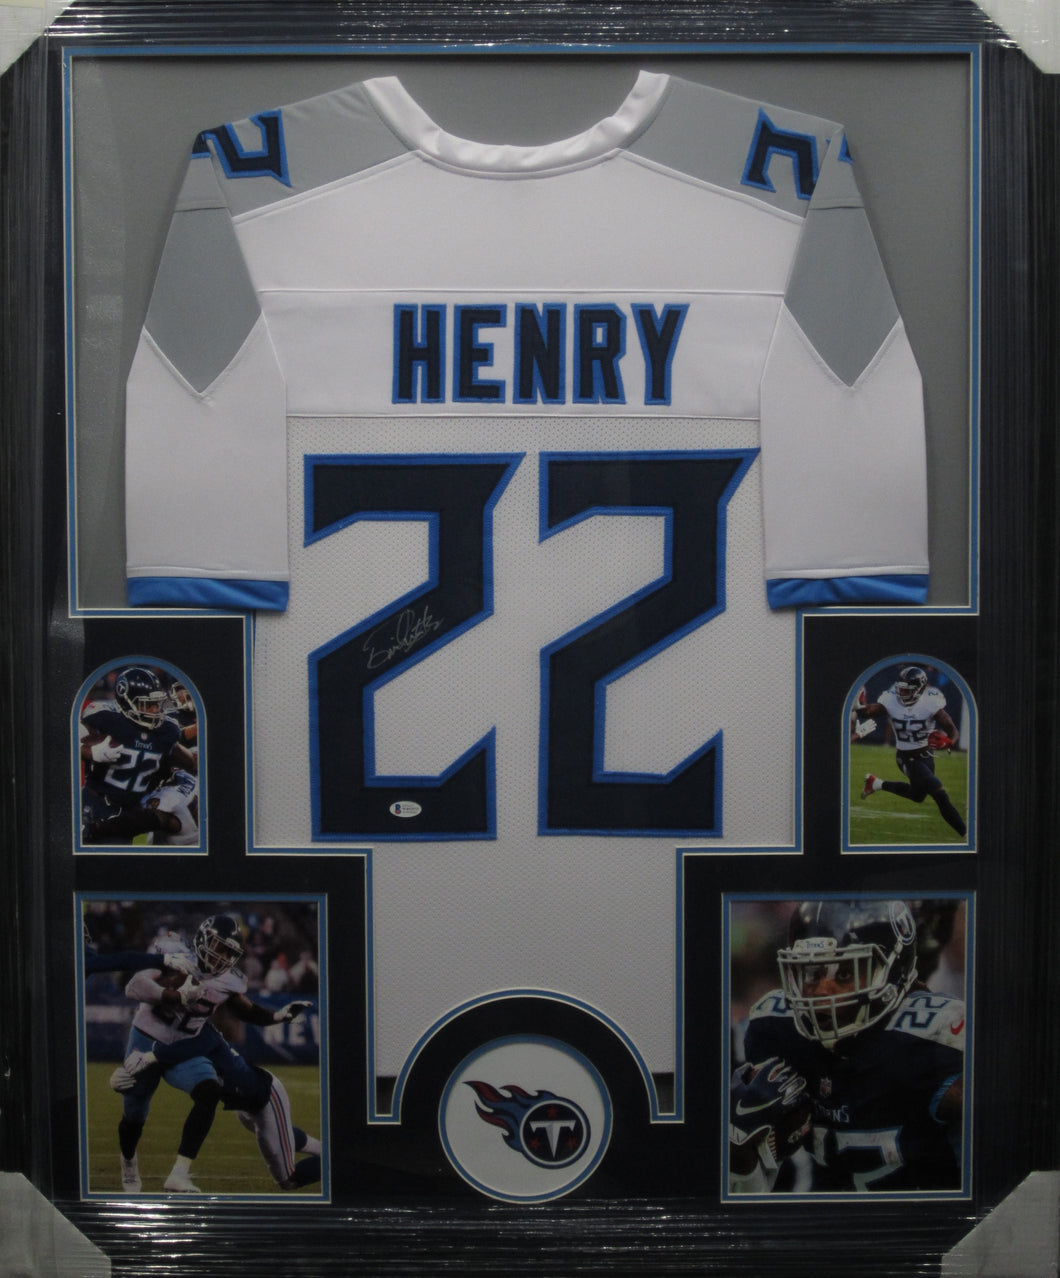 Tennessee Titans Derrick Henry Signed Jersey Framed & Matted with BECKETT COA